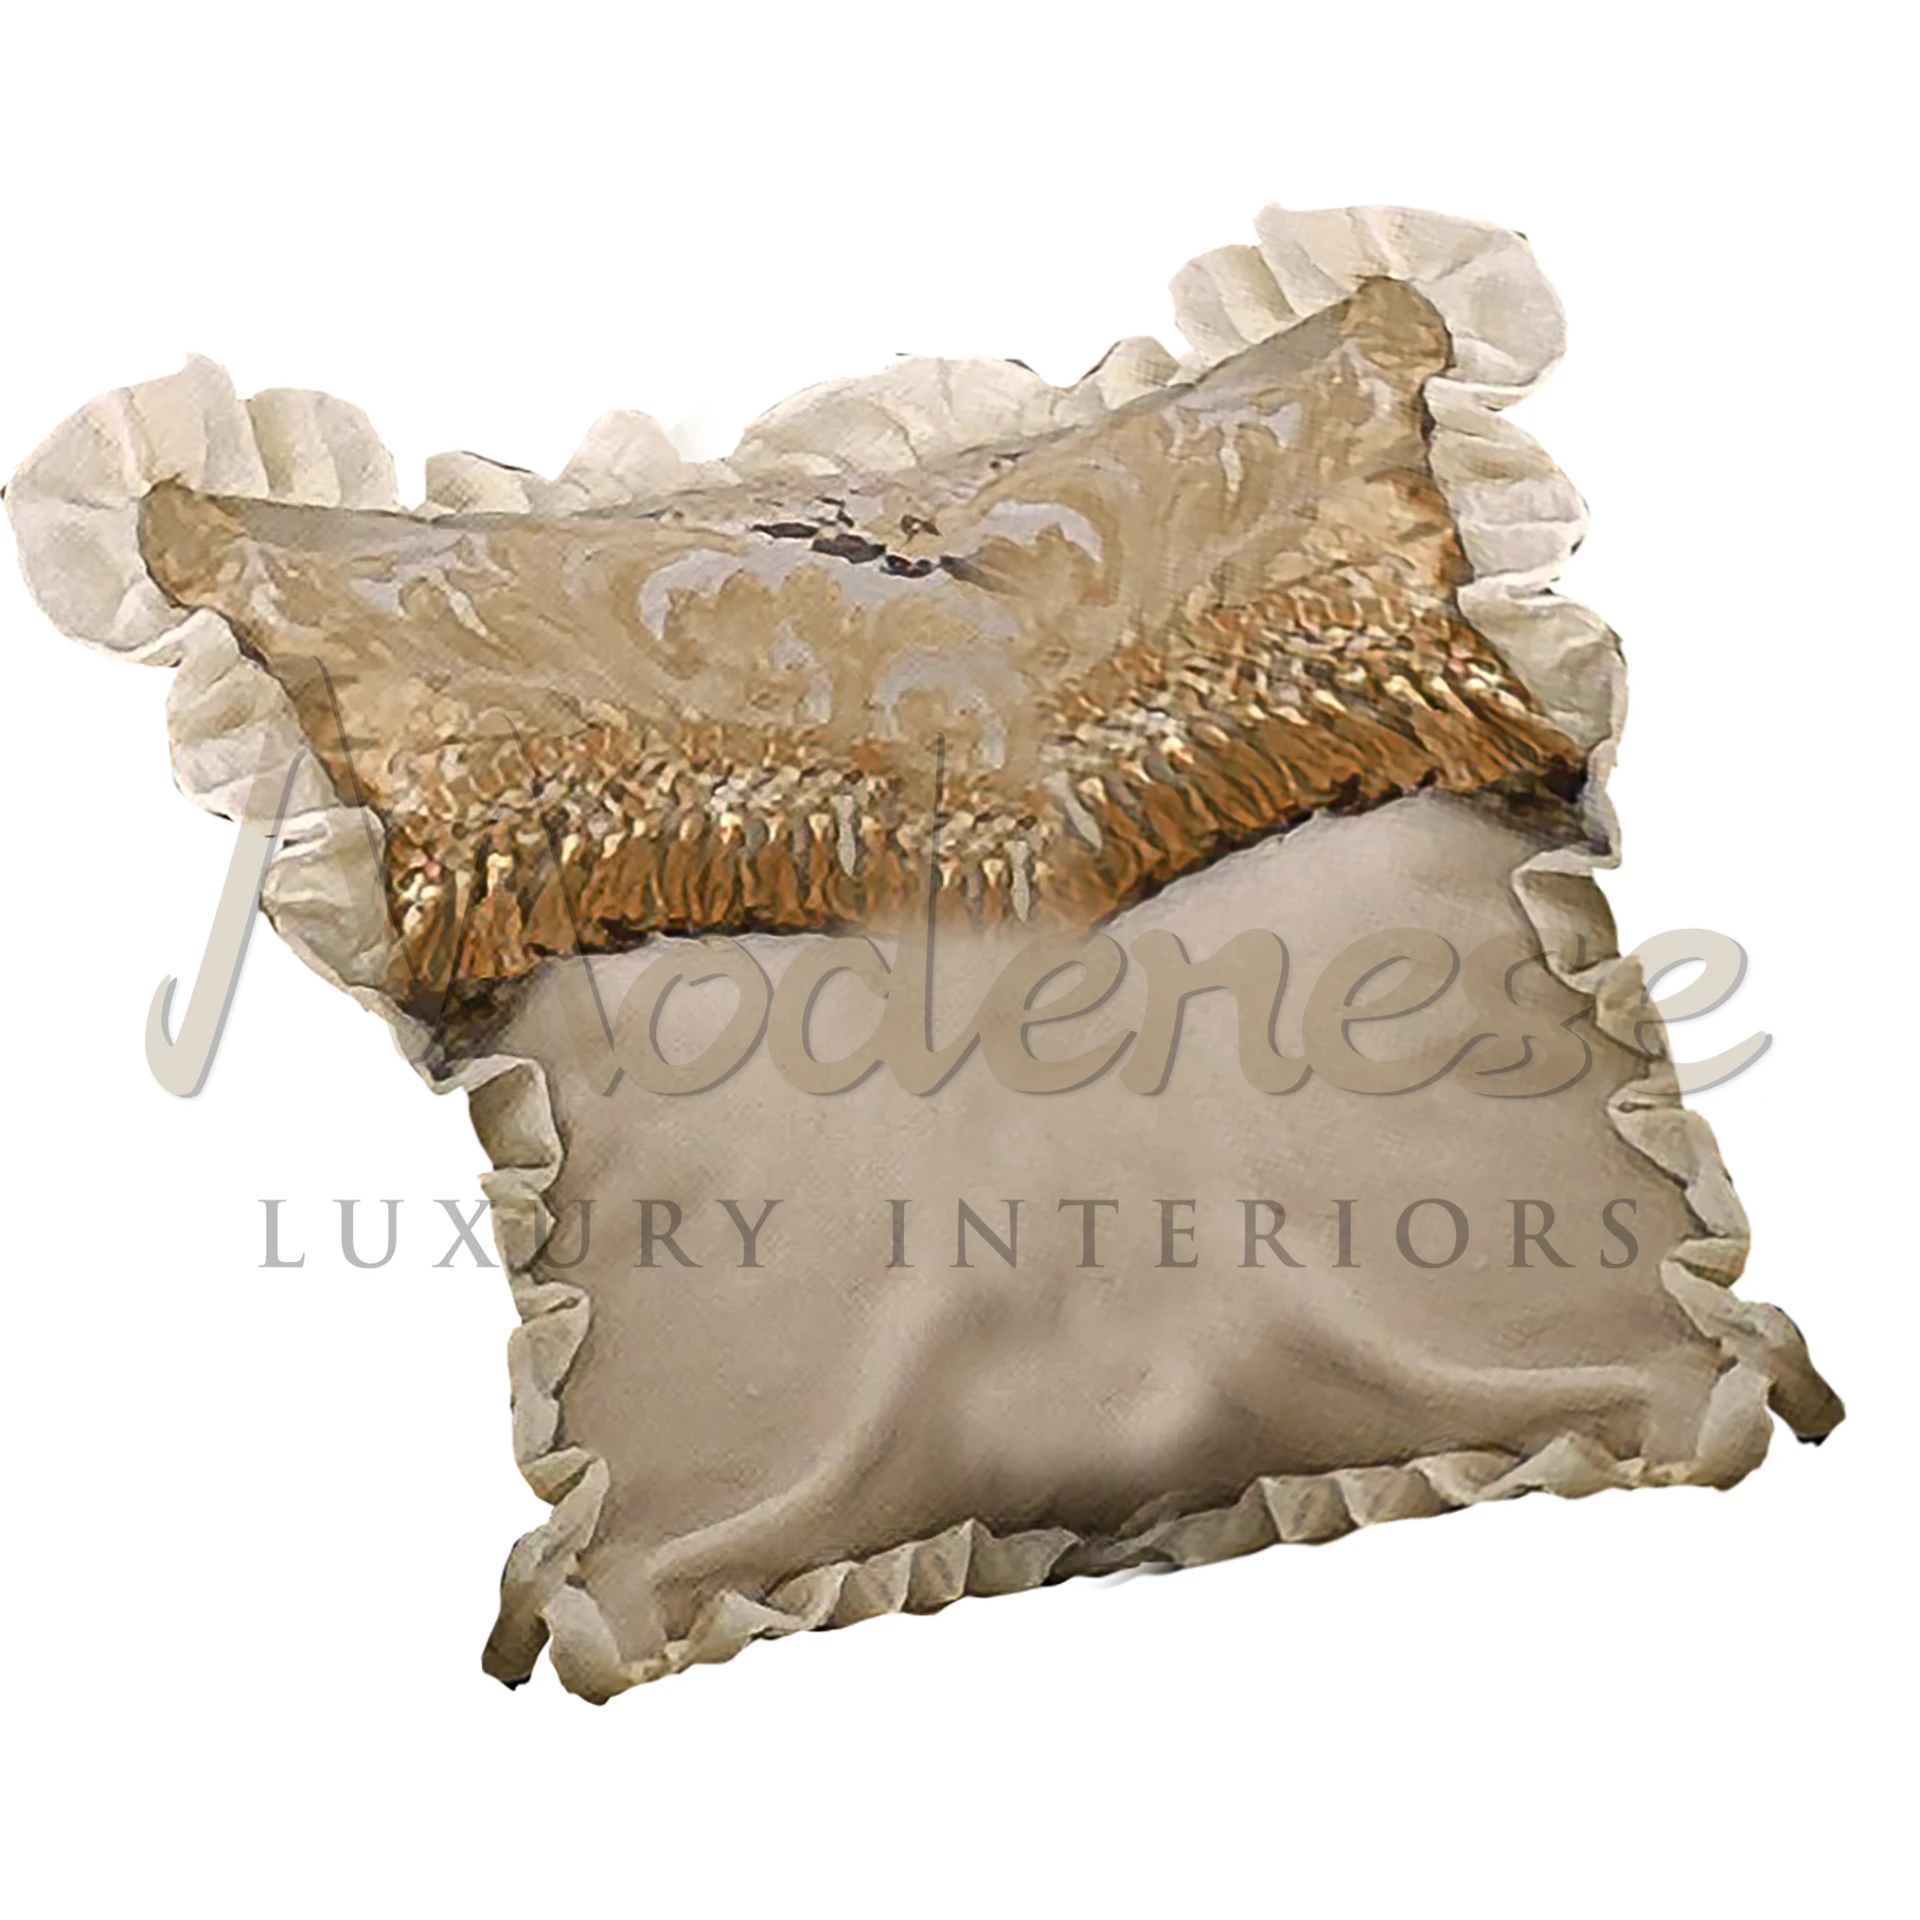 Luxury textiles meet superior support with our Deluxe Comfort Pillow, promoting restful sleep